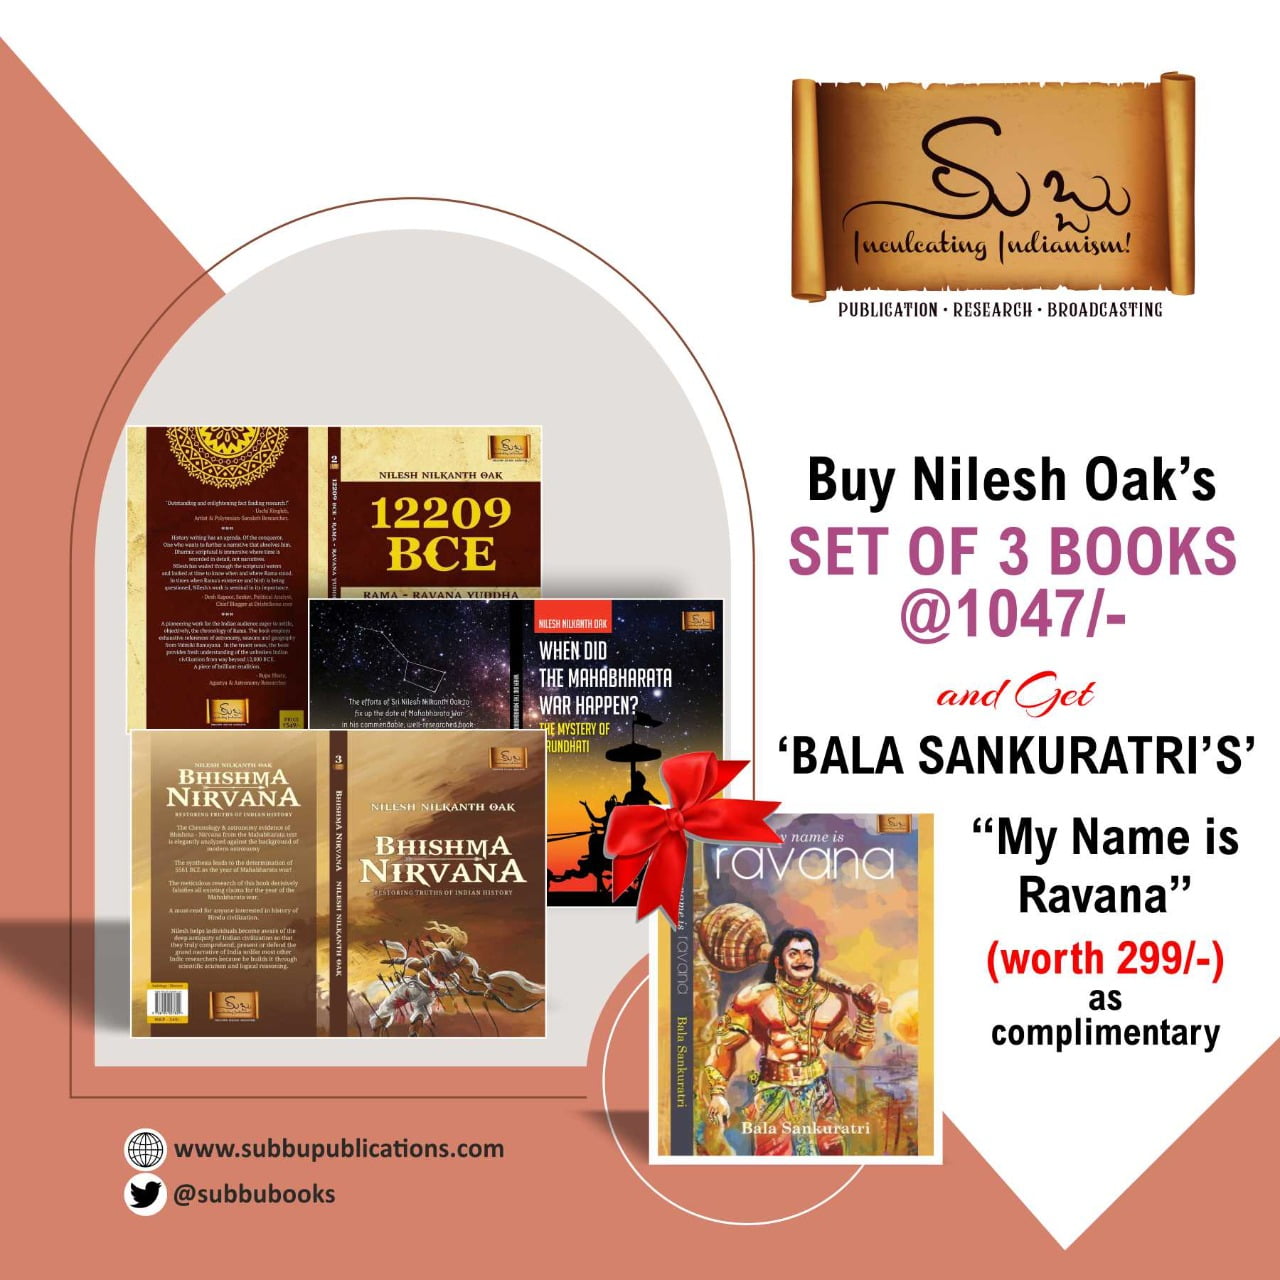 Nilesh Oak - Combo Offer @1047/- and get “My Name is Ravana” as complimentary